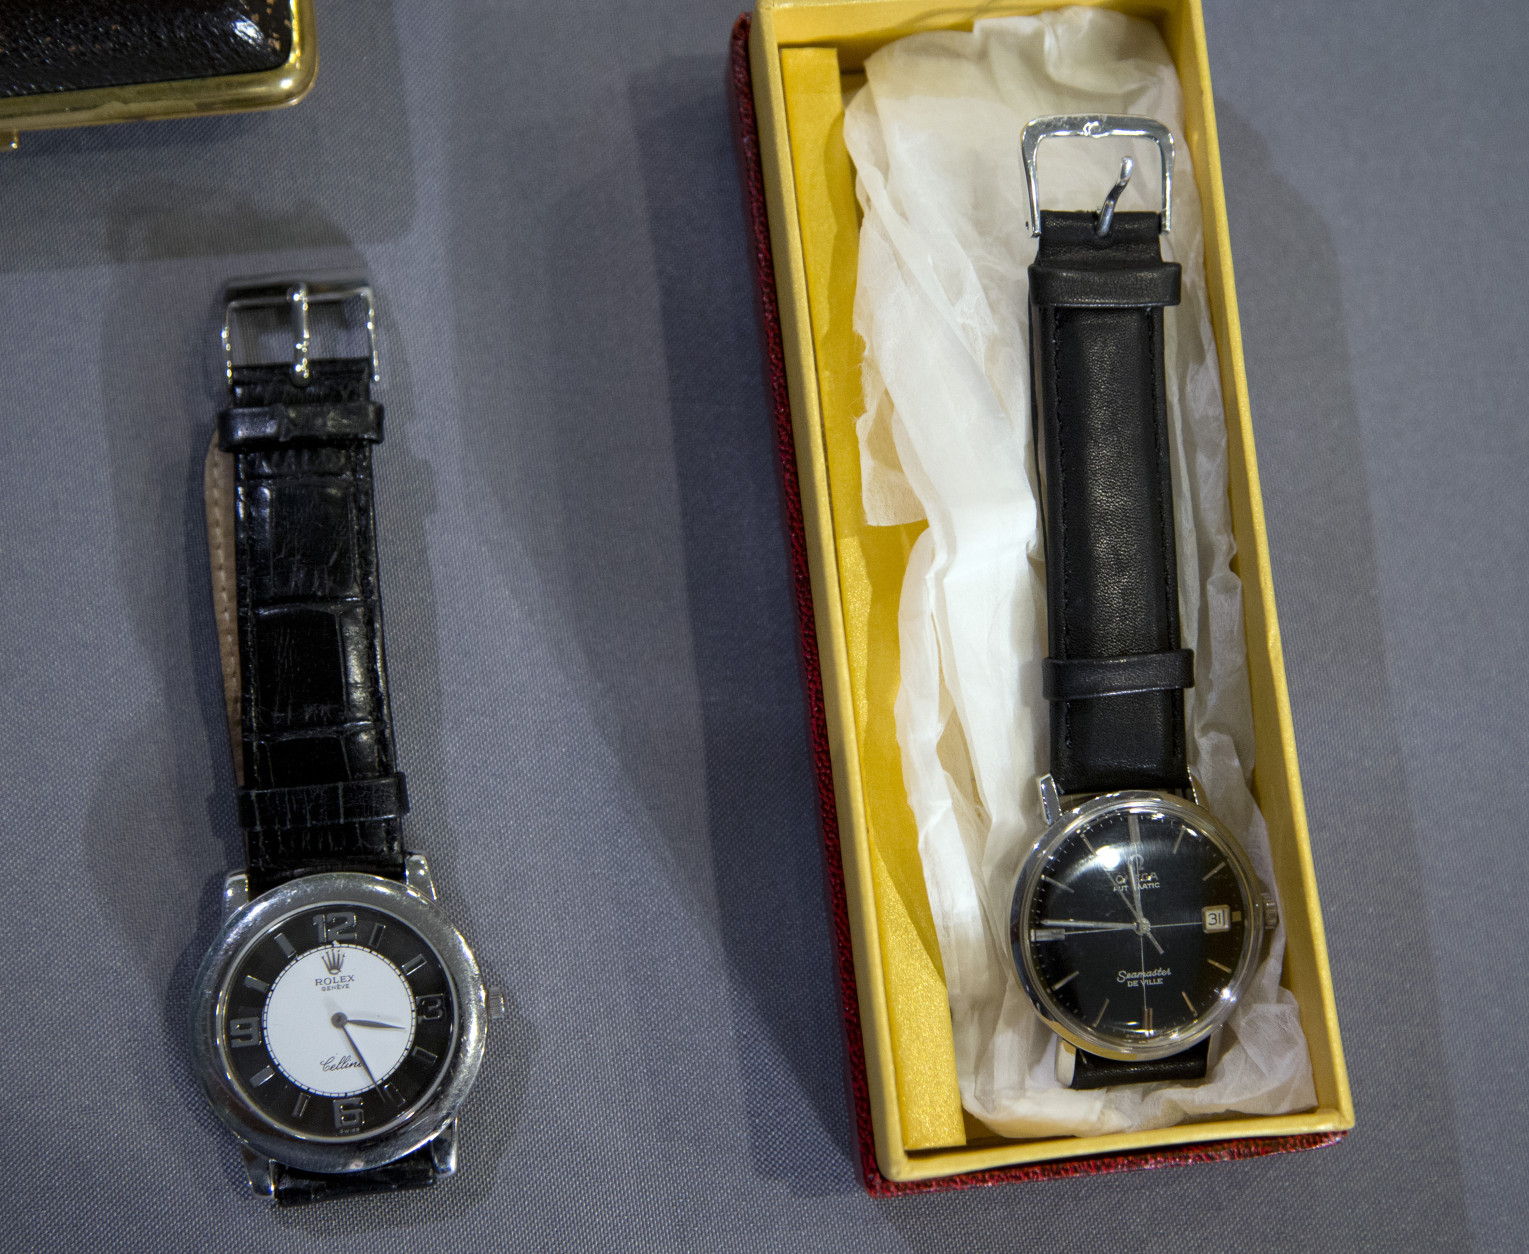 Two watches included with some objects, costumes, props, sketches and a script AMC and Lionsgate TV series, "Mad Men" donated to the National Museum of American History in Washington, is displayed during a ceremony, Friday, March 27, 2015.   (AP Photo/Manuel Balce Ceneta)